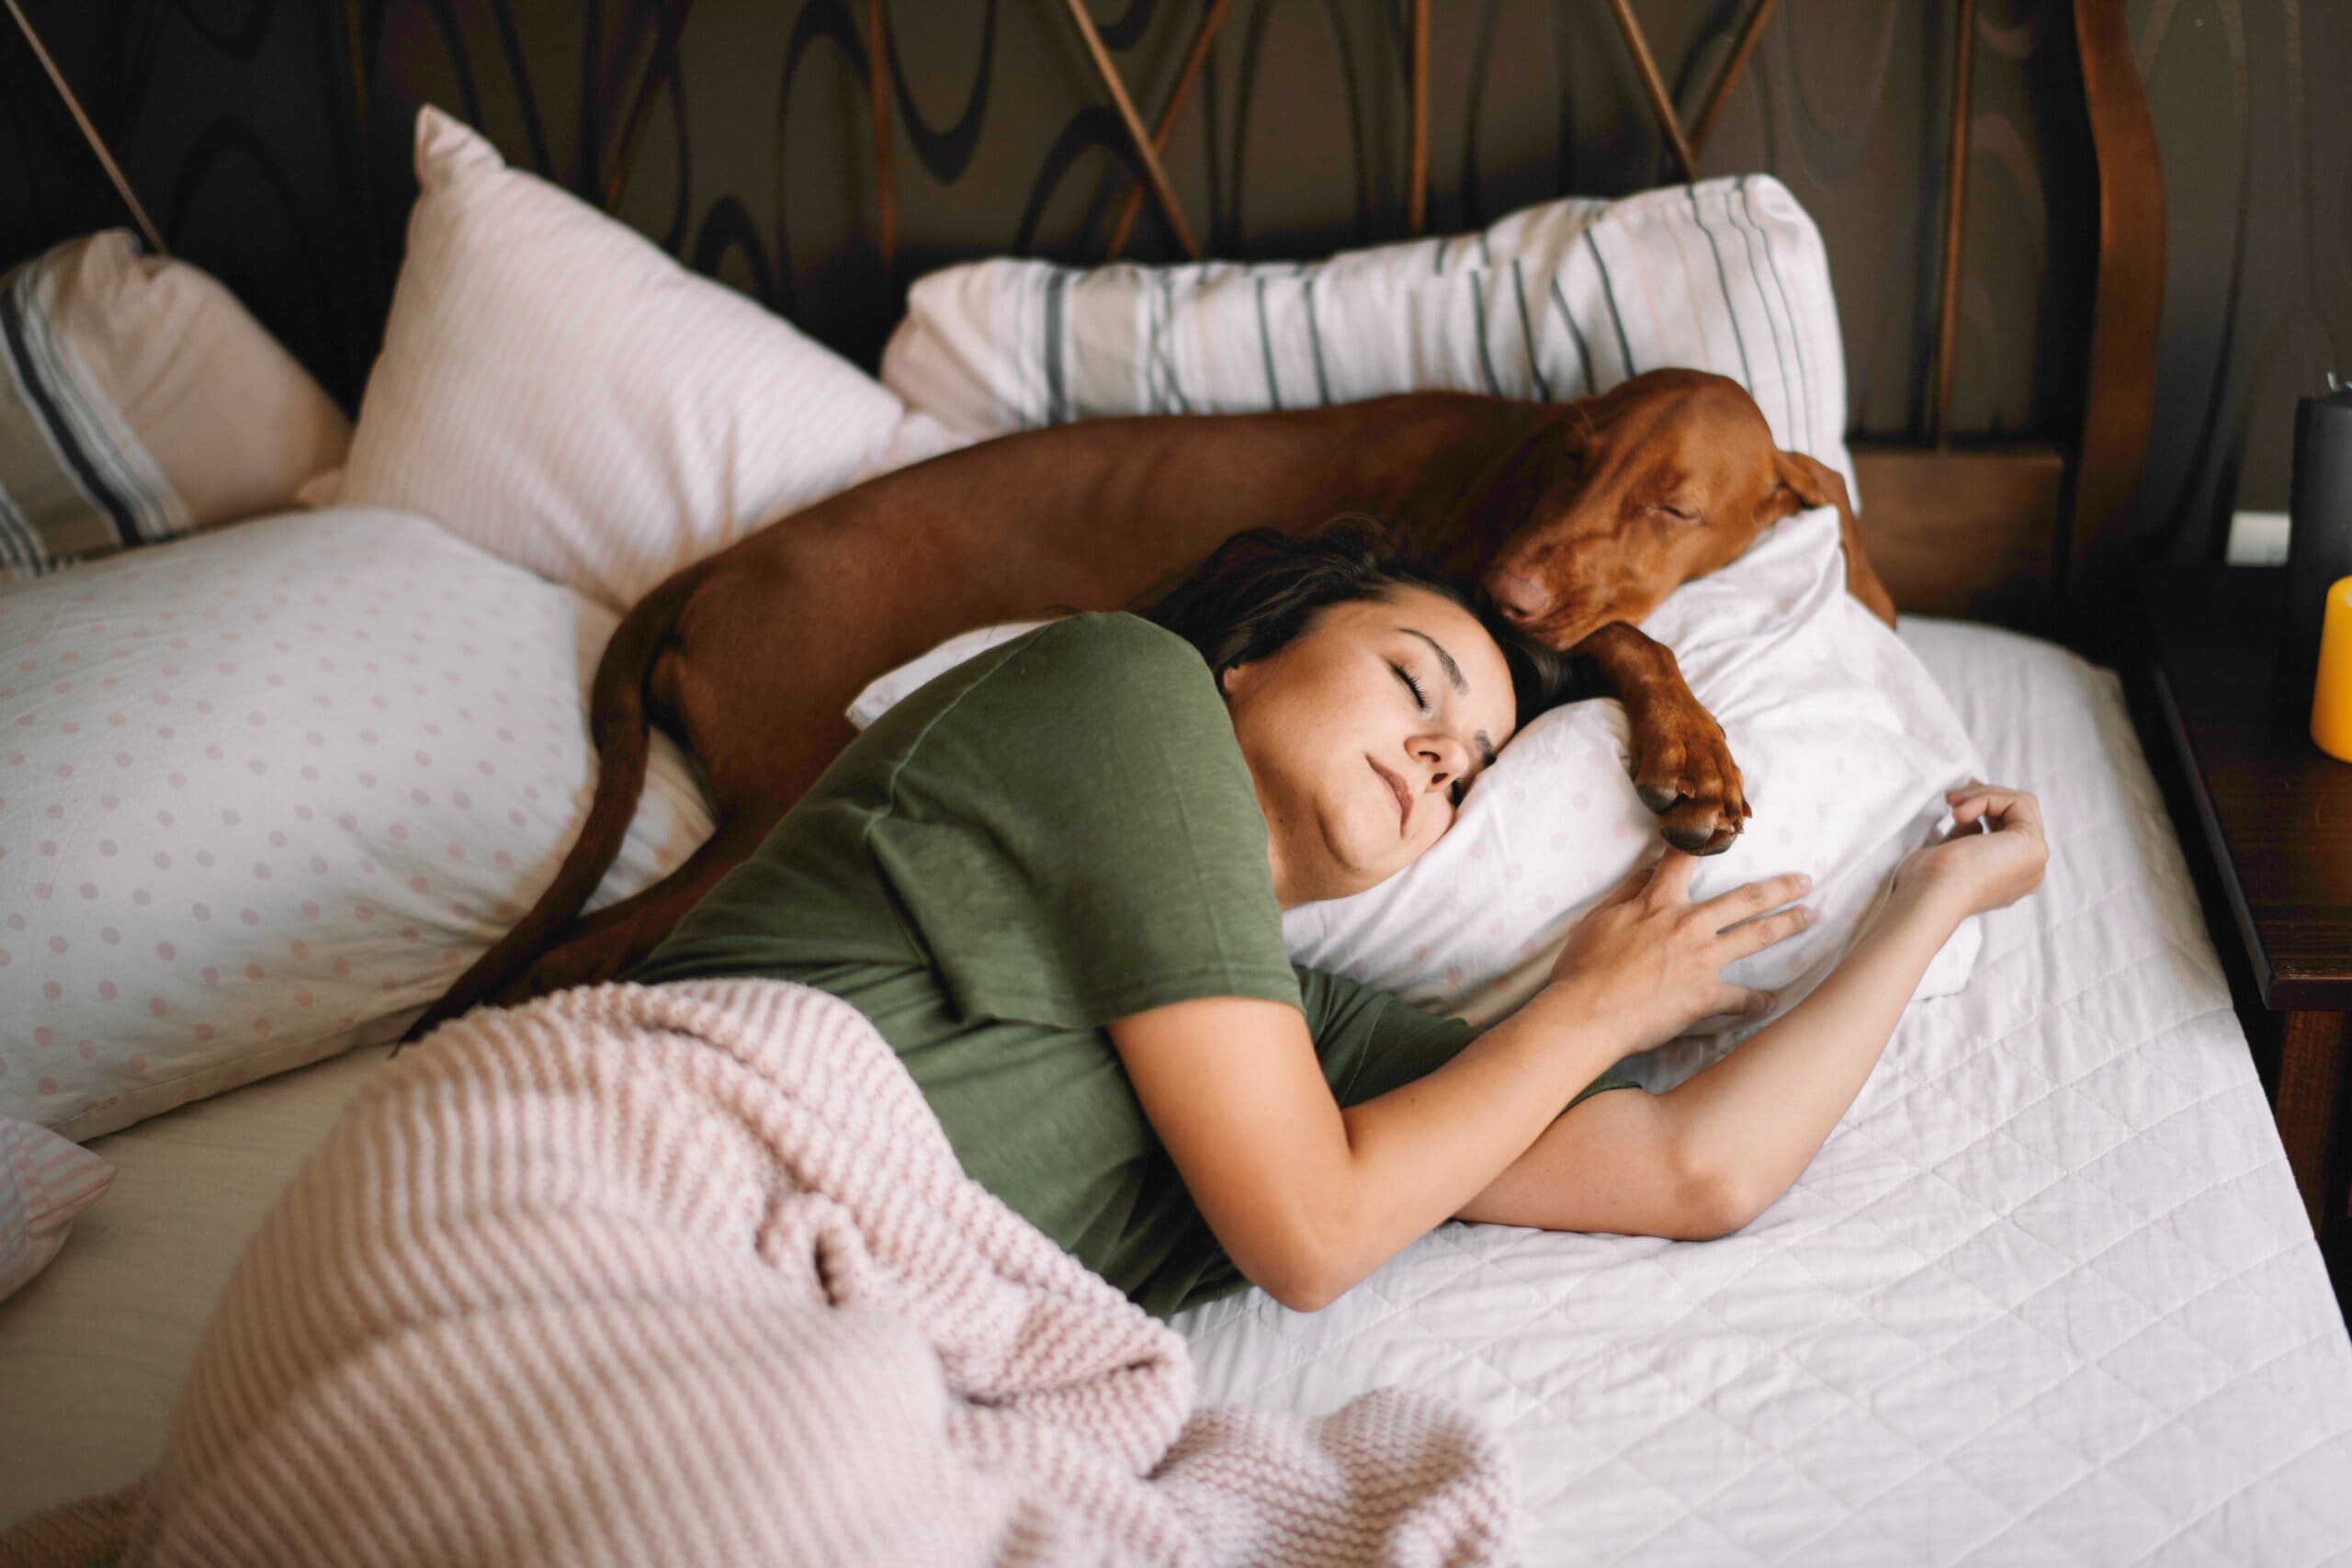 Woman cosy in bed with dog, blanket over her.